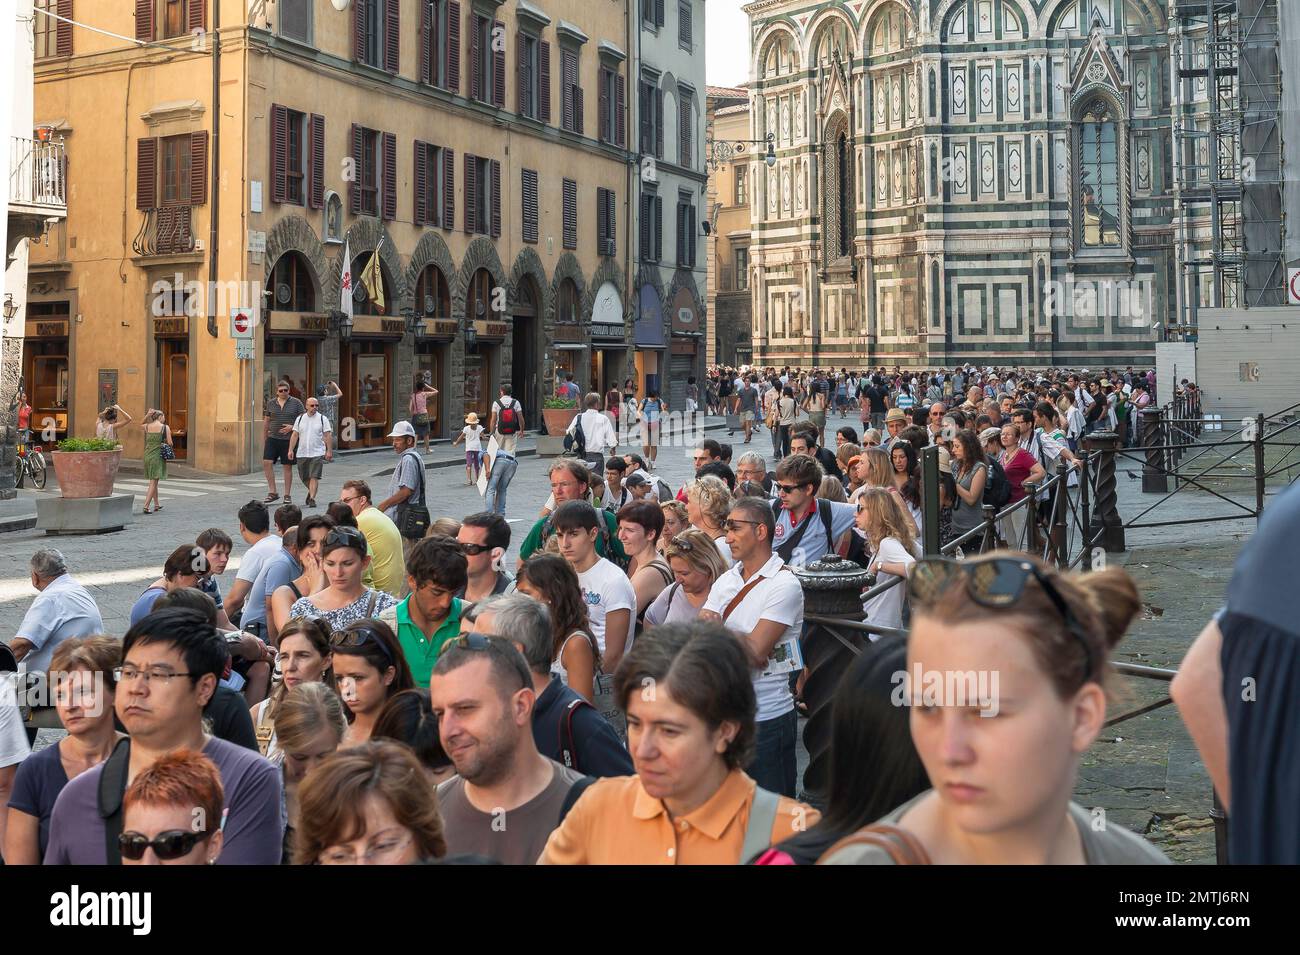 Tourism crowd, view in summer of a long line of tourists queuing to enter the Duomo (cathedral) in the center of Florence, Tuscany, Italy, Europe Stock Photo